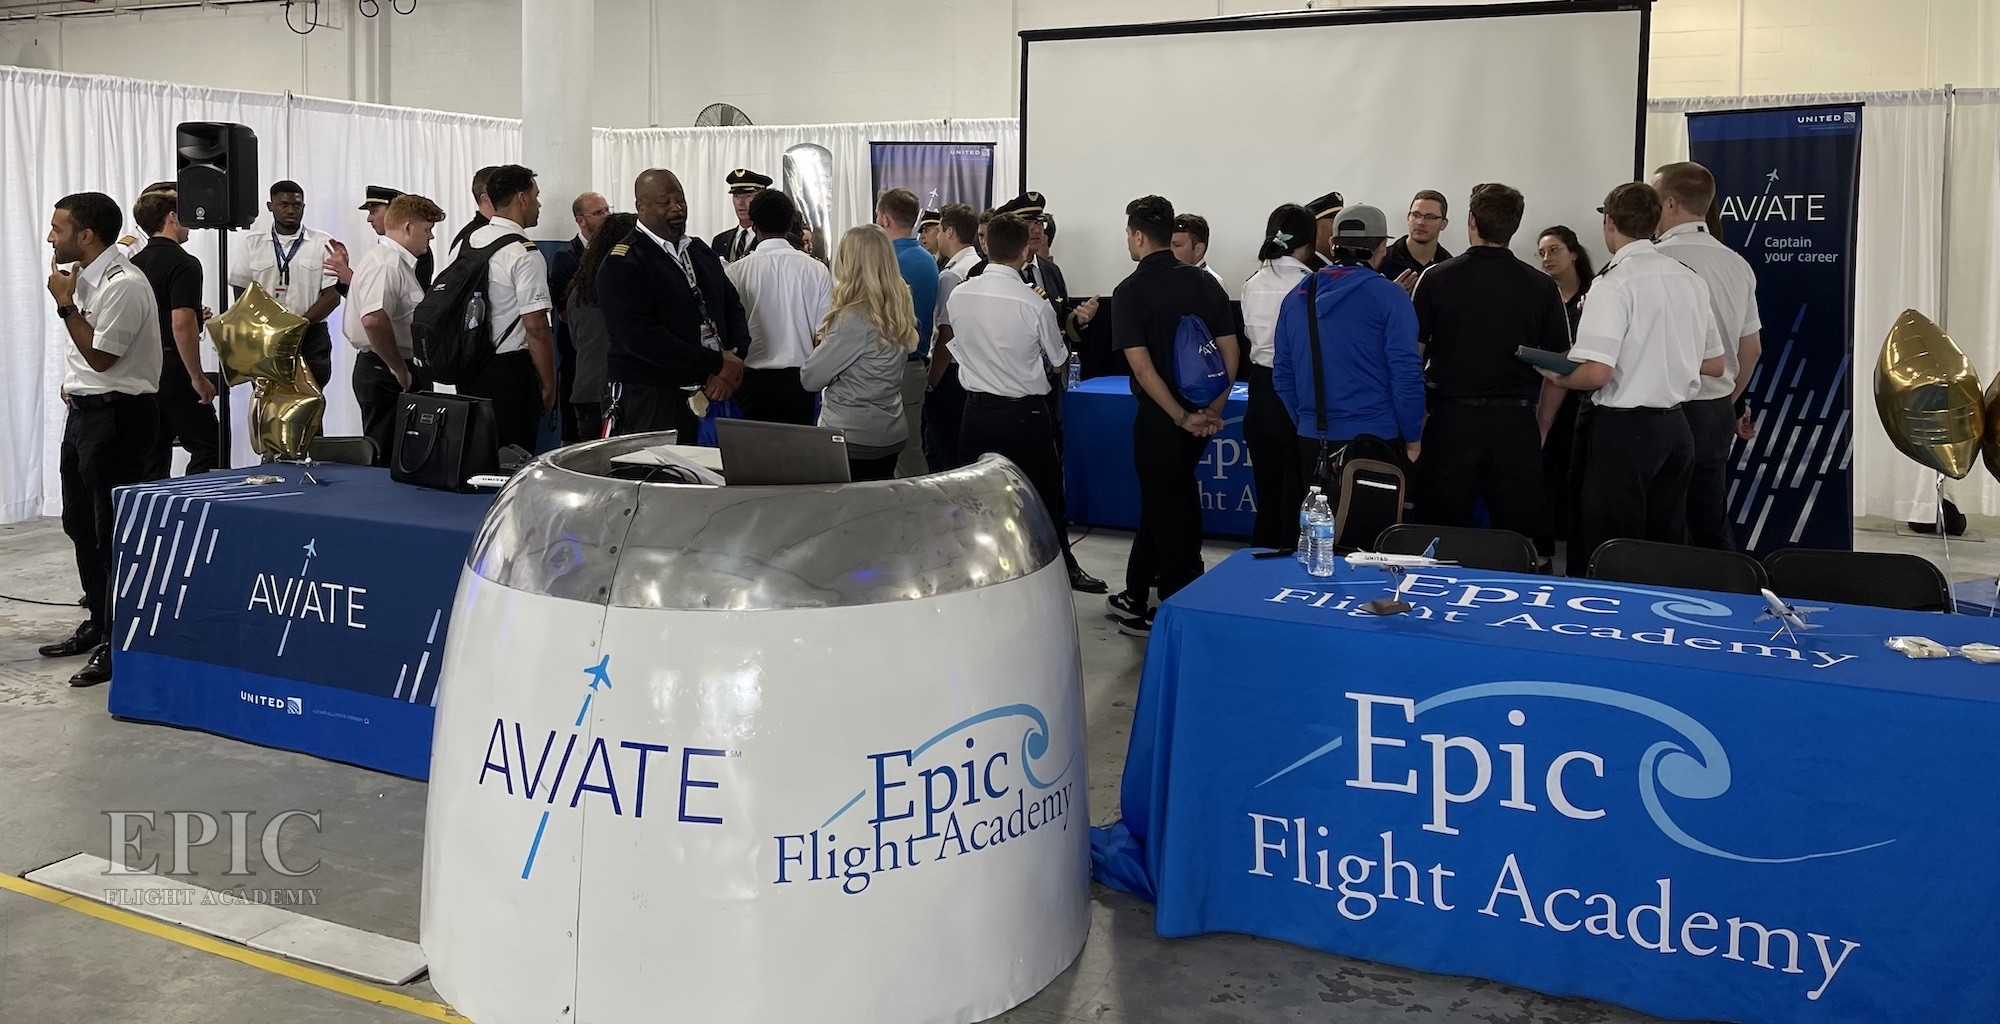 Epic and United Aviate event